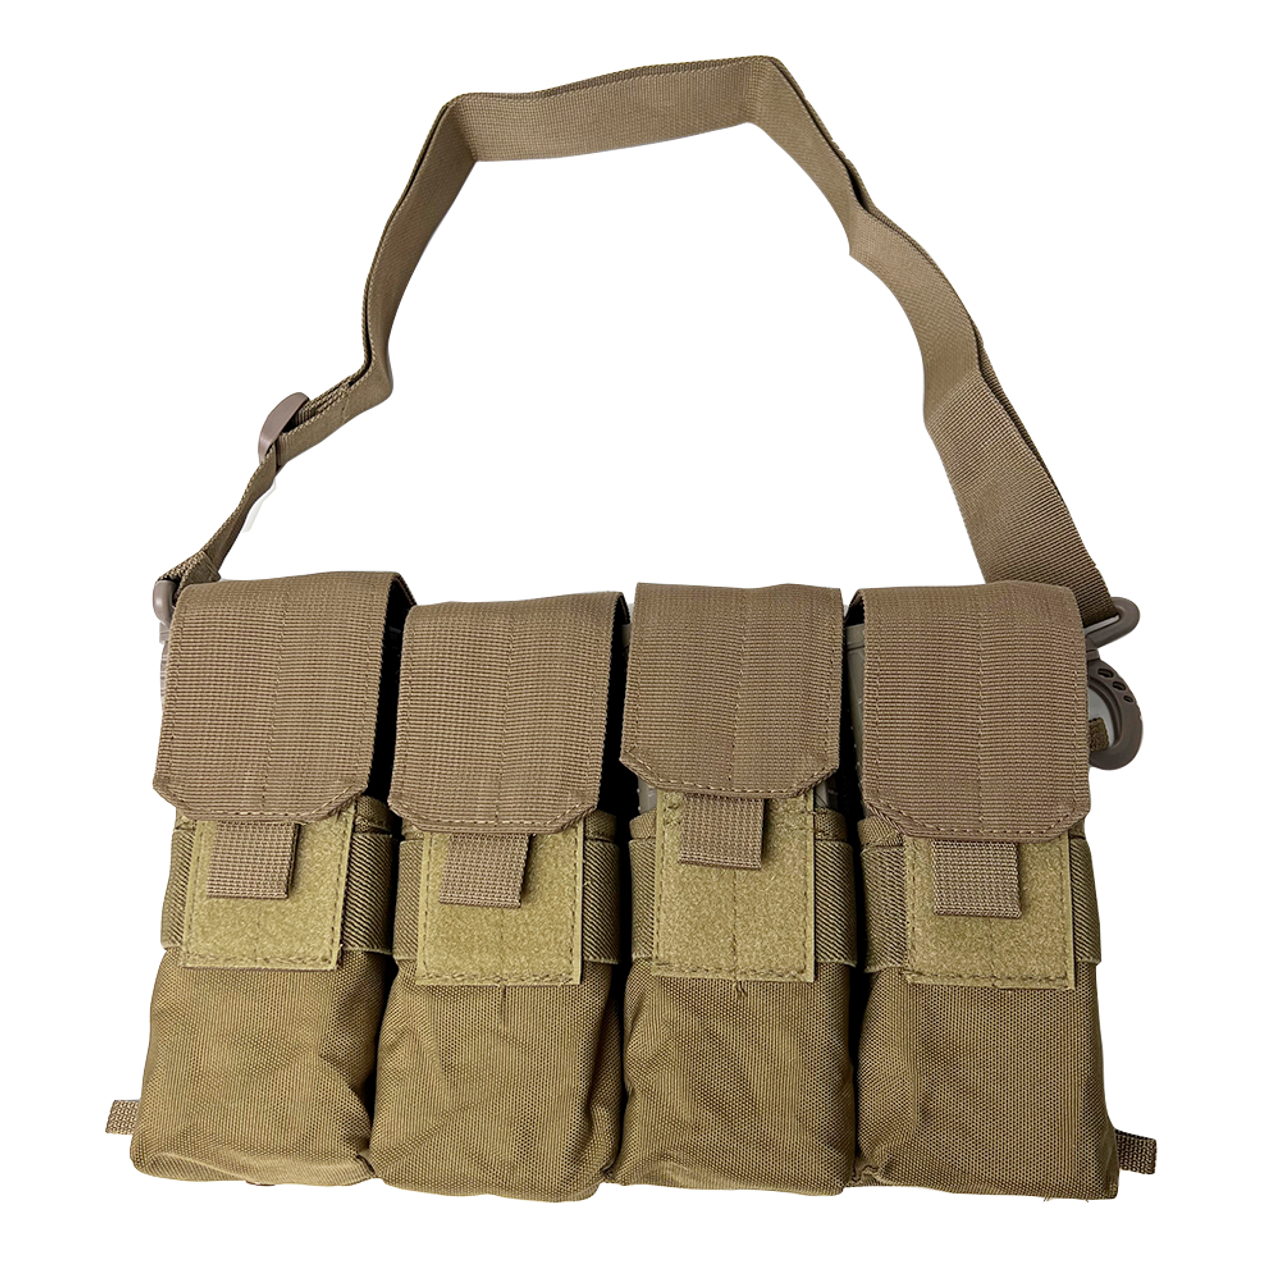 NcSTAR CVMARC3044T 223/556 Mag Carrier and Pouch Holds 8 30 Round Magazines